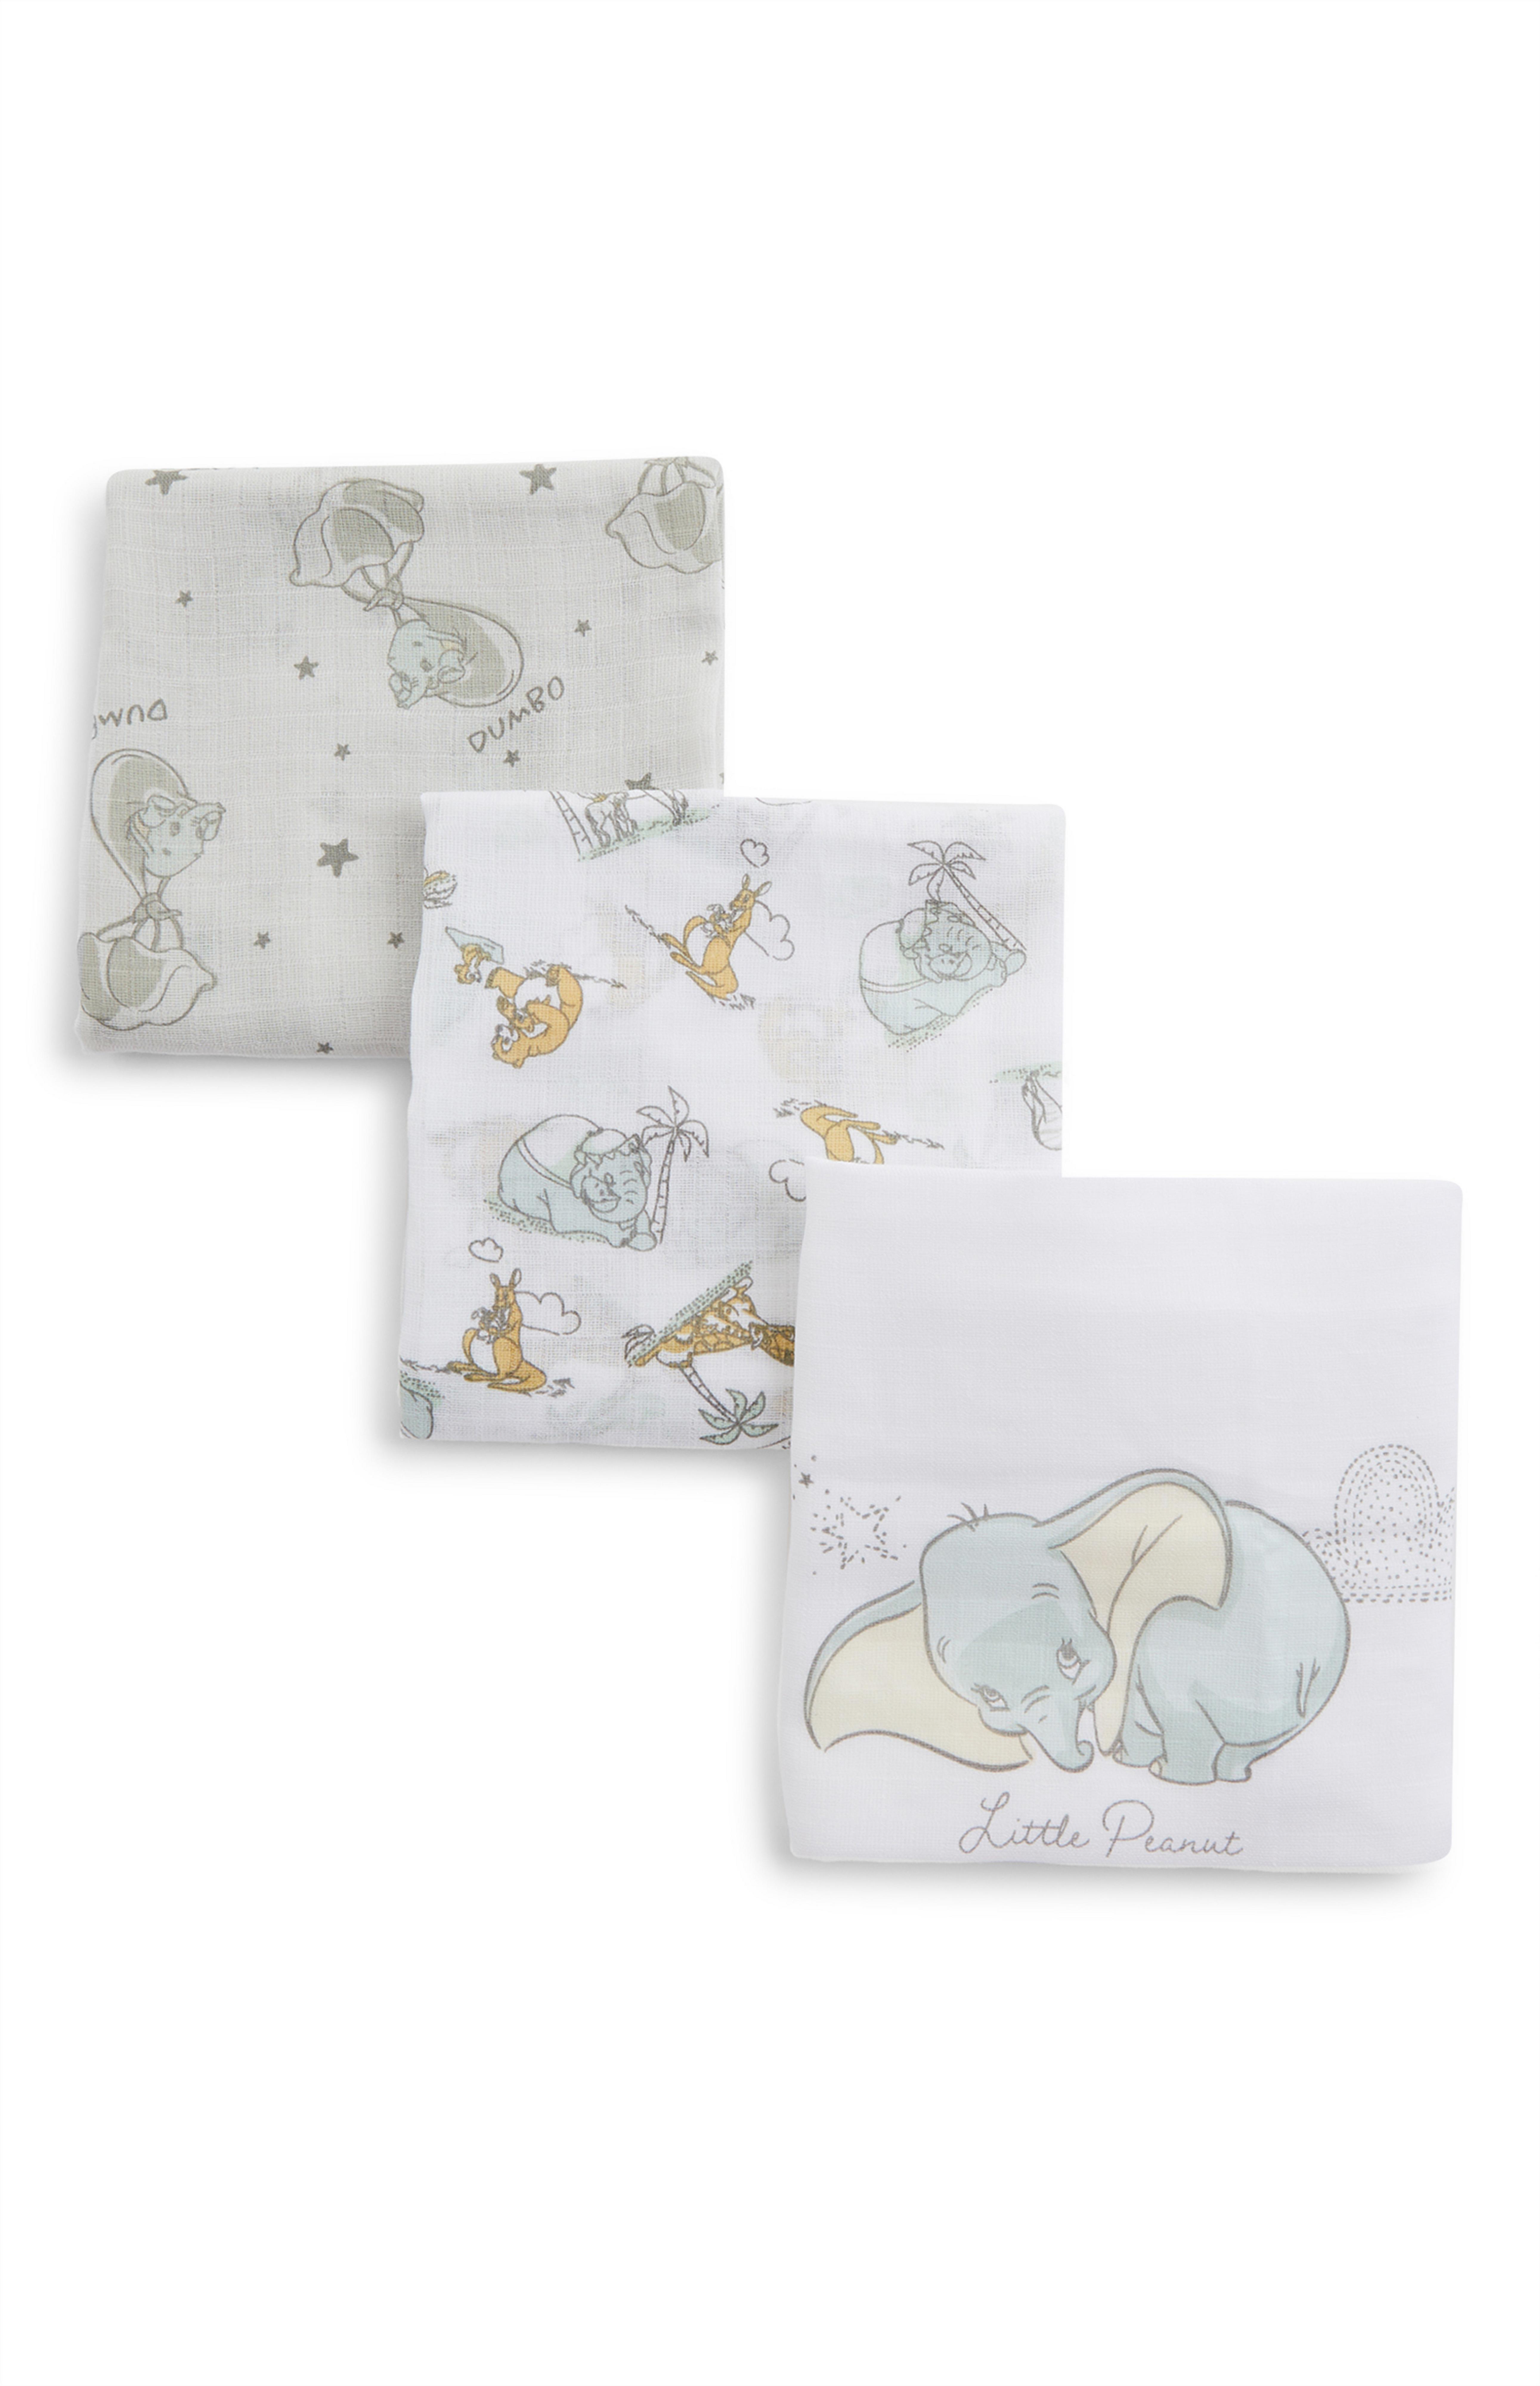 White Disney Dumbo Print Baby Muslins 3 Pack Baby Accessories Baby Newborn Clothes Kids Clothes All Primark Products Primark Poland